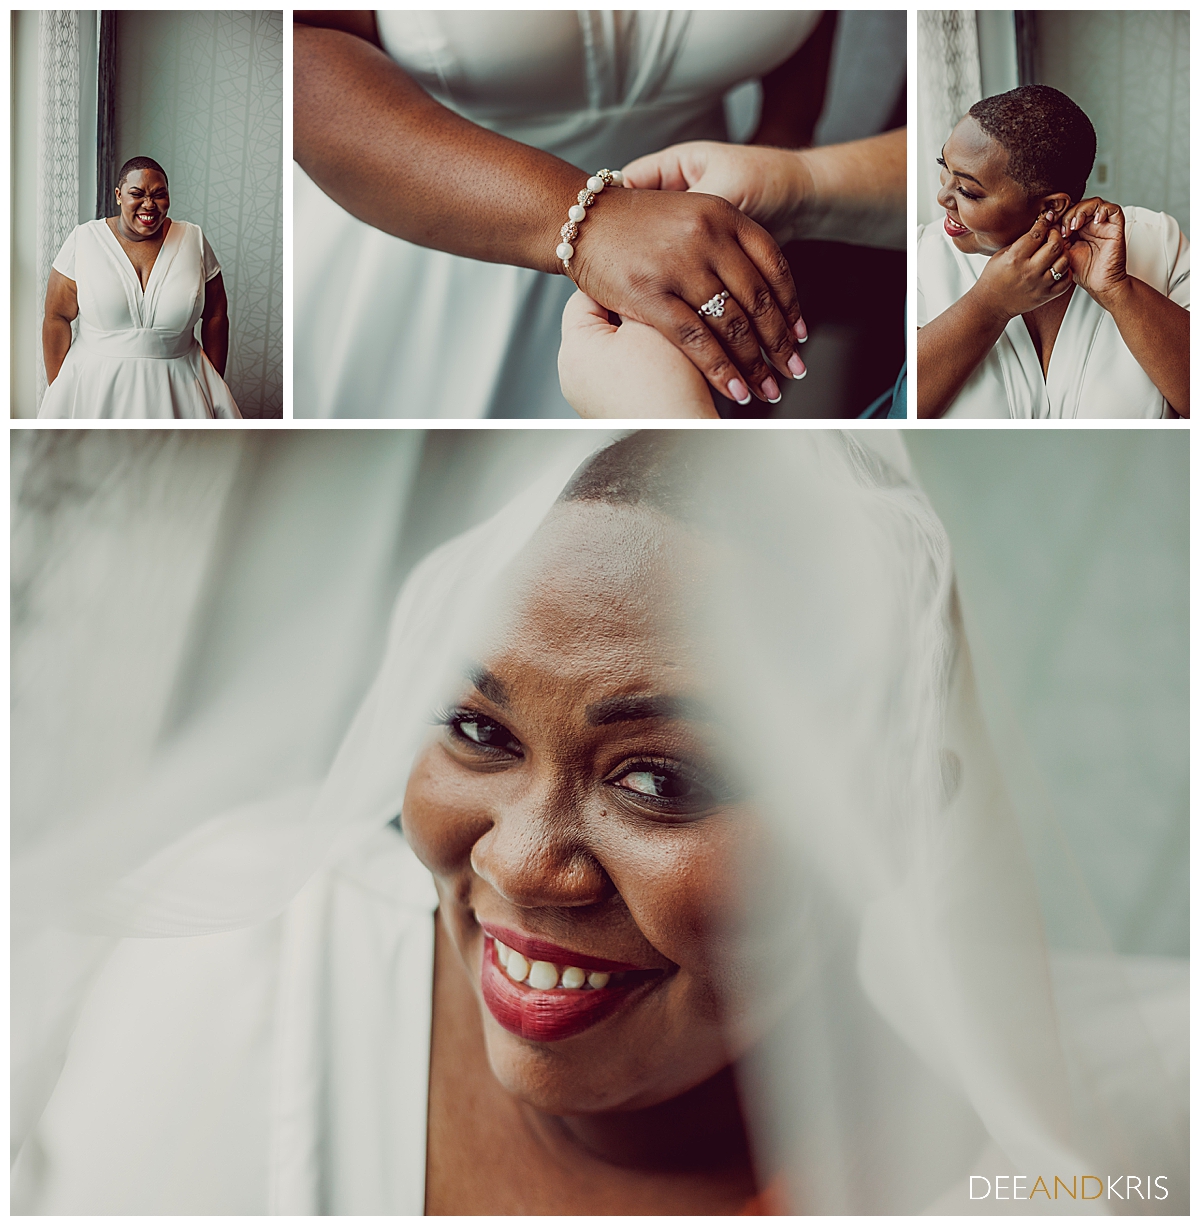 Four images: Top left image of bride laughing at camera with hands in her pockets. Top middle image of bride having her bracelet put on. Top right image of bride putting on earrings. Bottom image of bride sileing while enveloped in her veil.